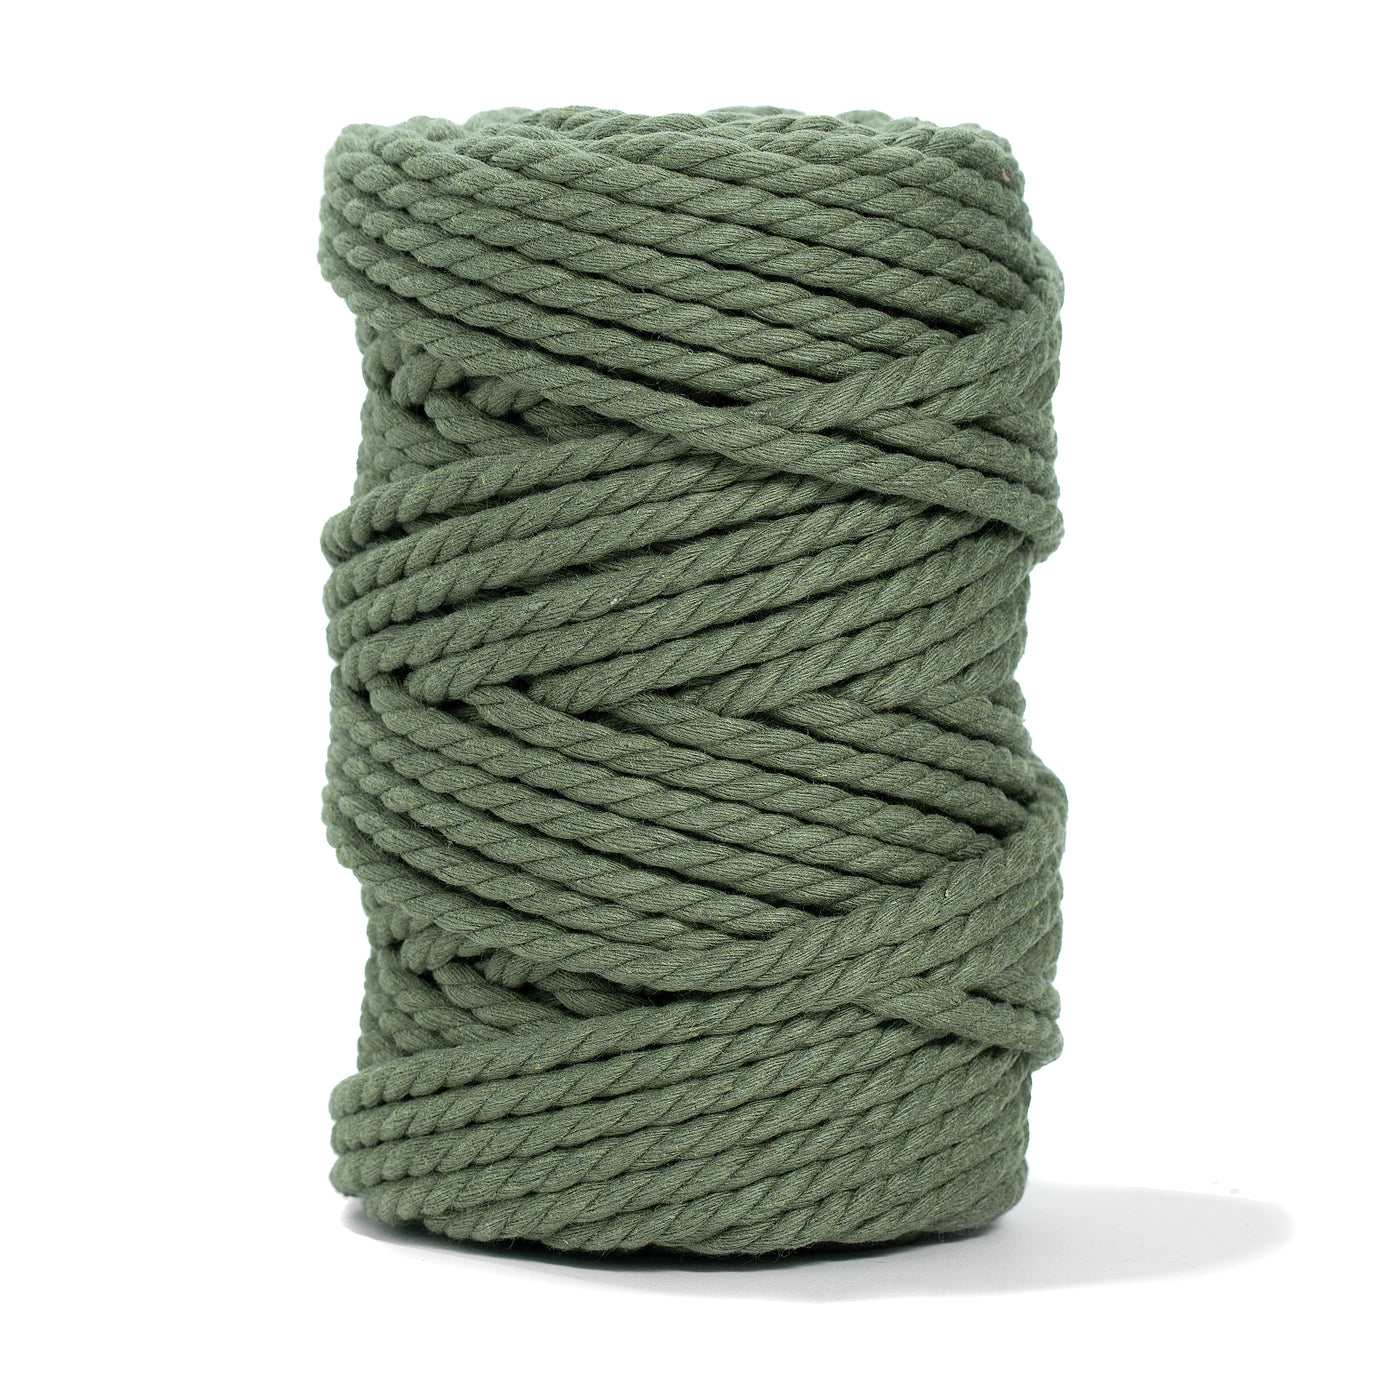 COTTON ROPE ZERO WASTE 5 MM - 3 PLY - MOSS GREEN COLOR